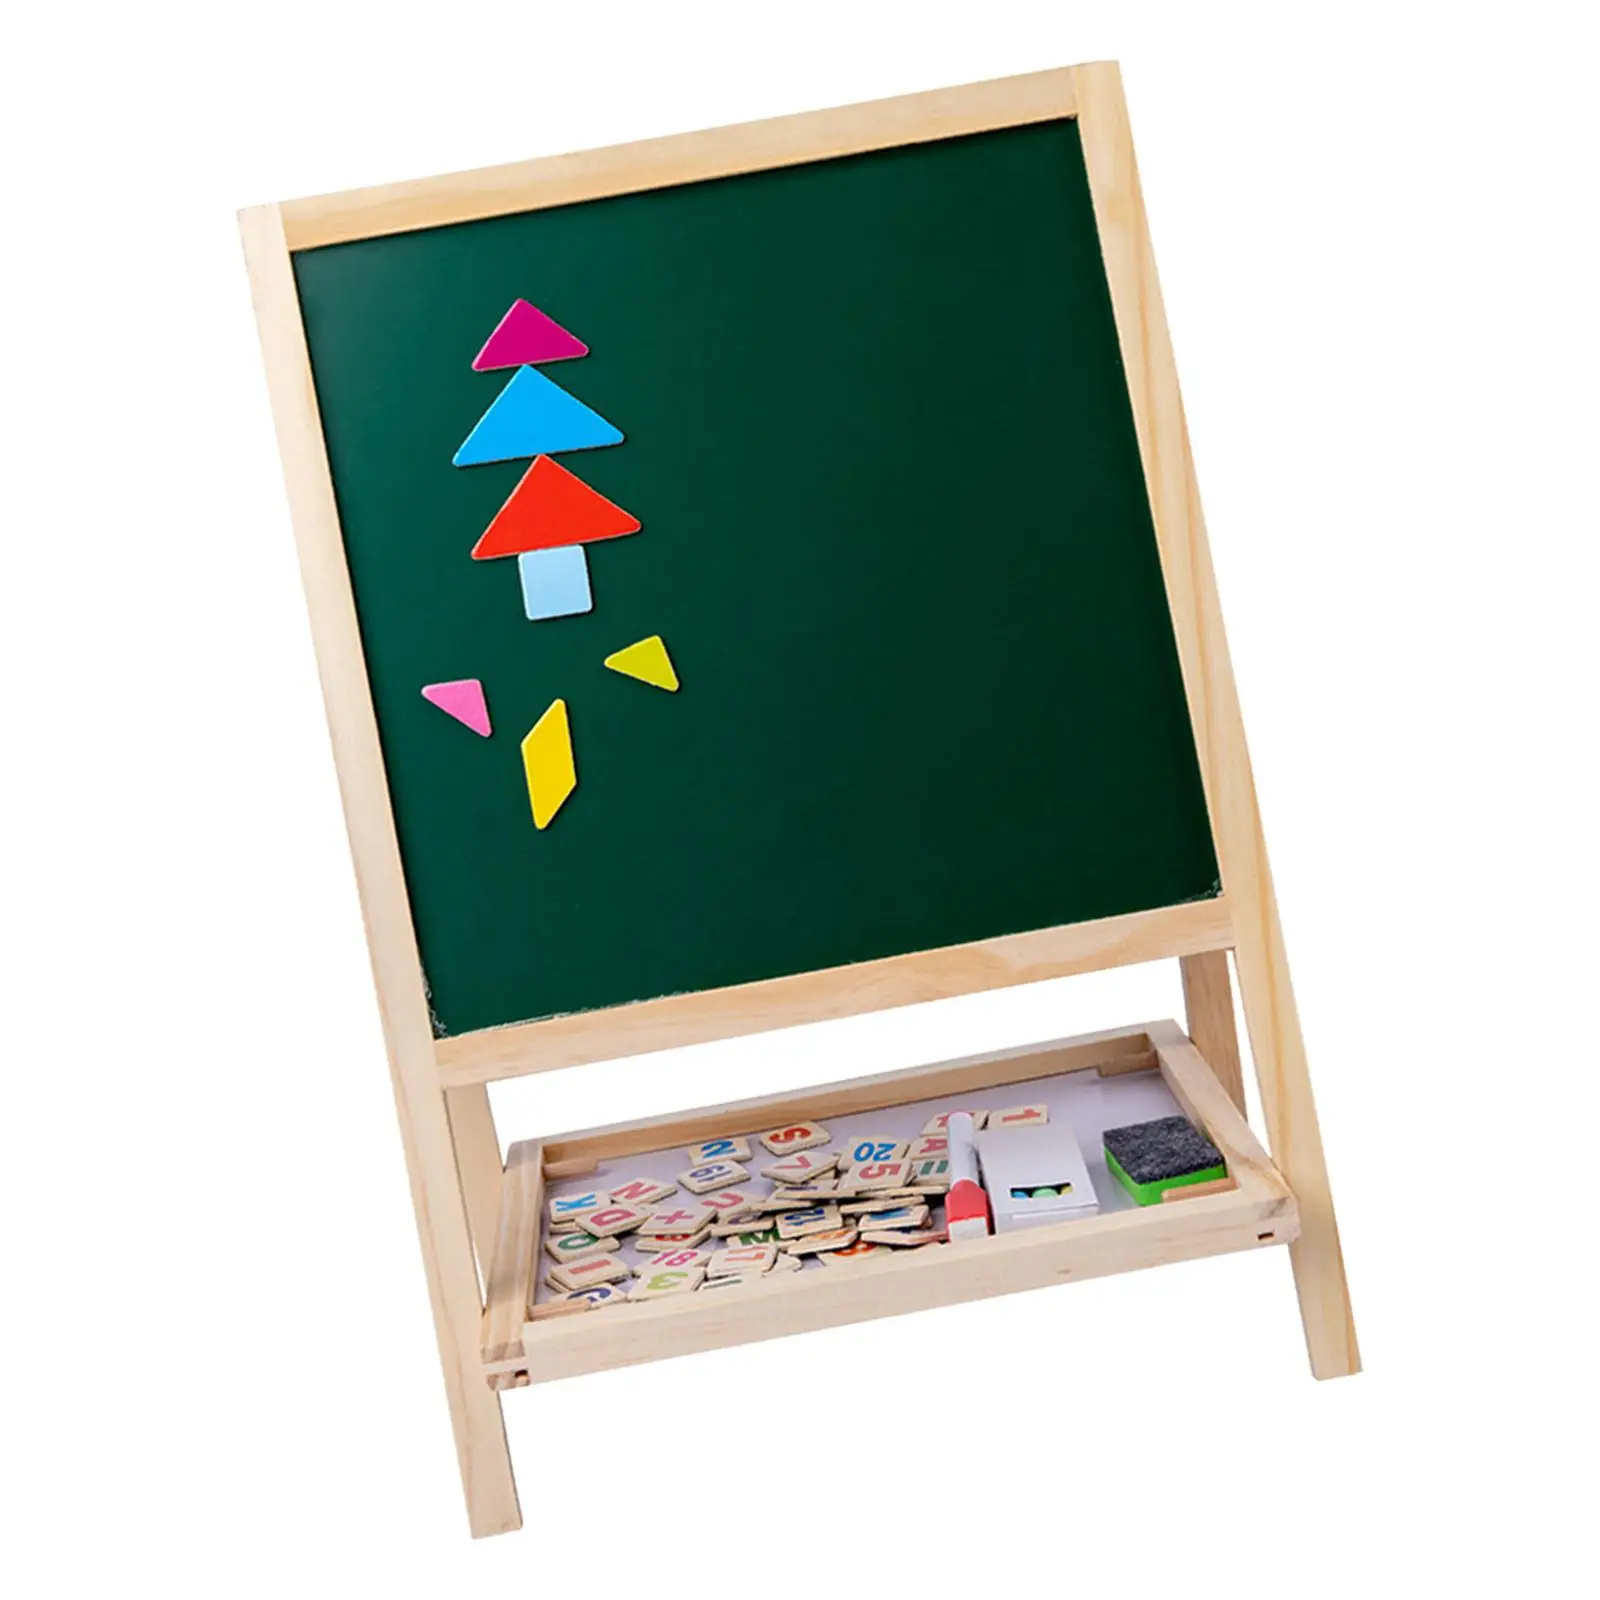 Art Easel For Kids Standing Easel With Magnetic Drawing Board